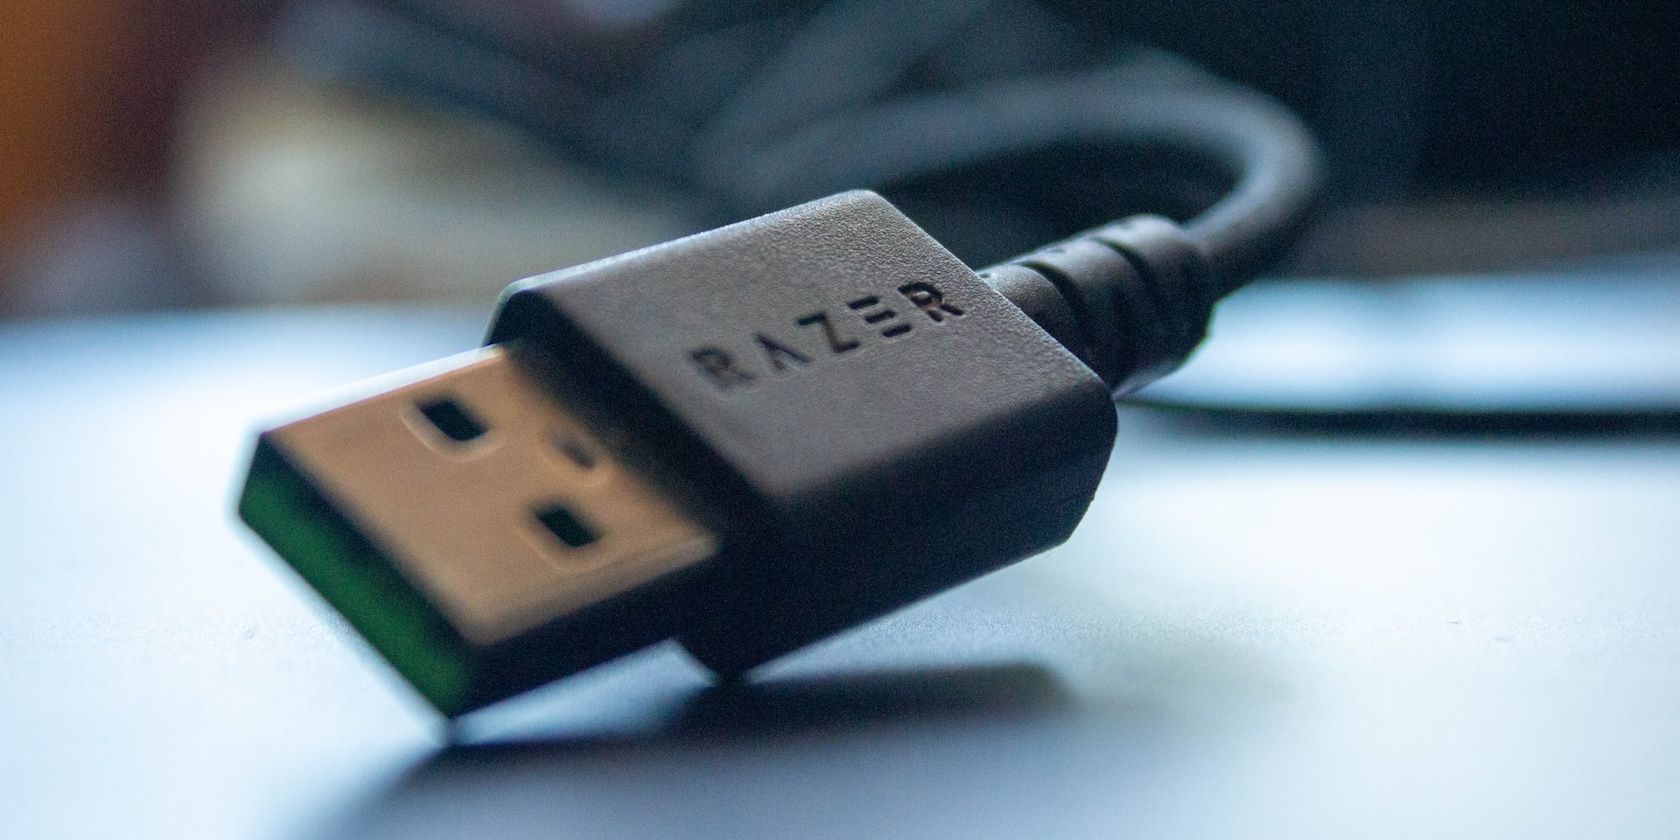 An Image of the Charger Side of a USB Cable